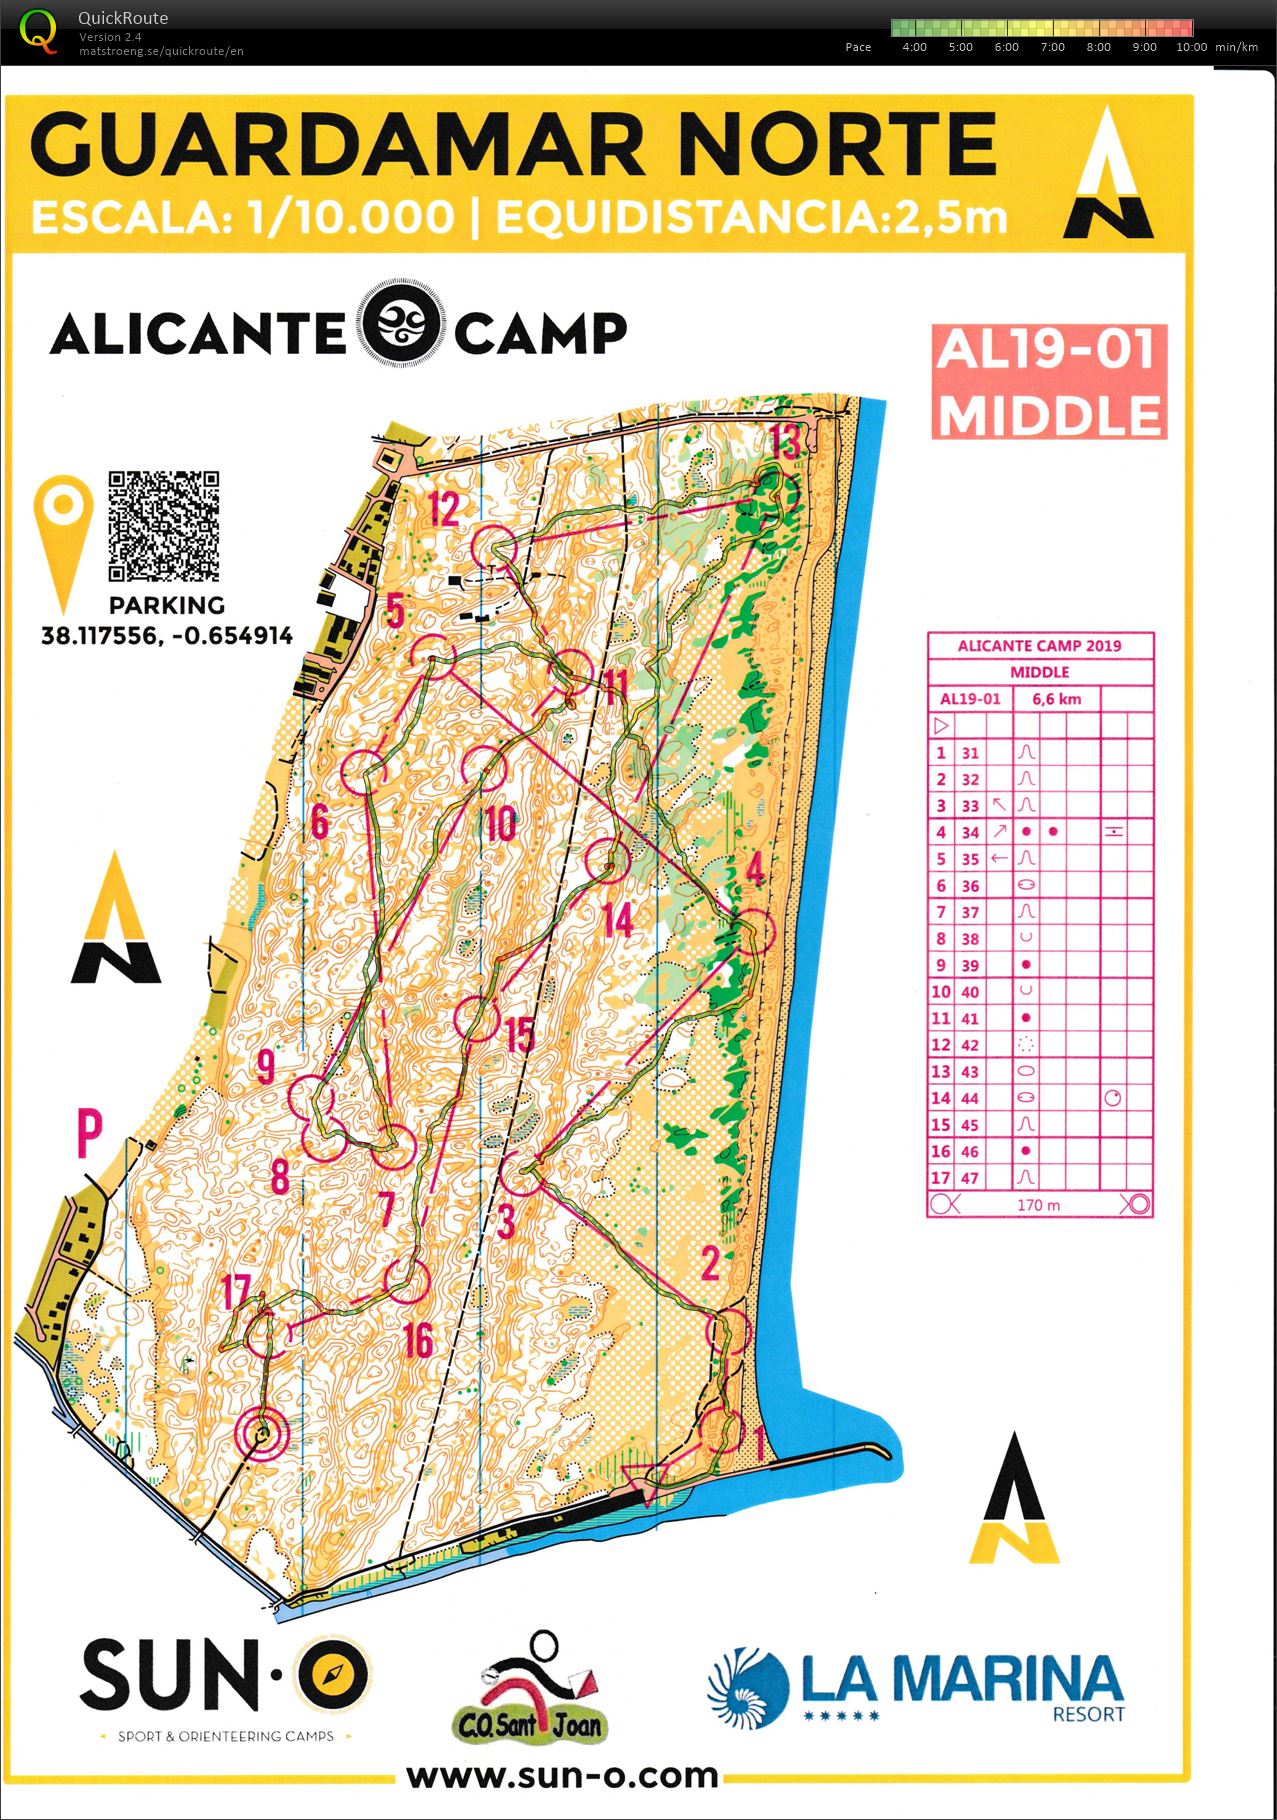 TC Alicante #7, middle rychle (23.01.2019)